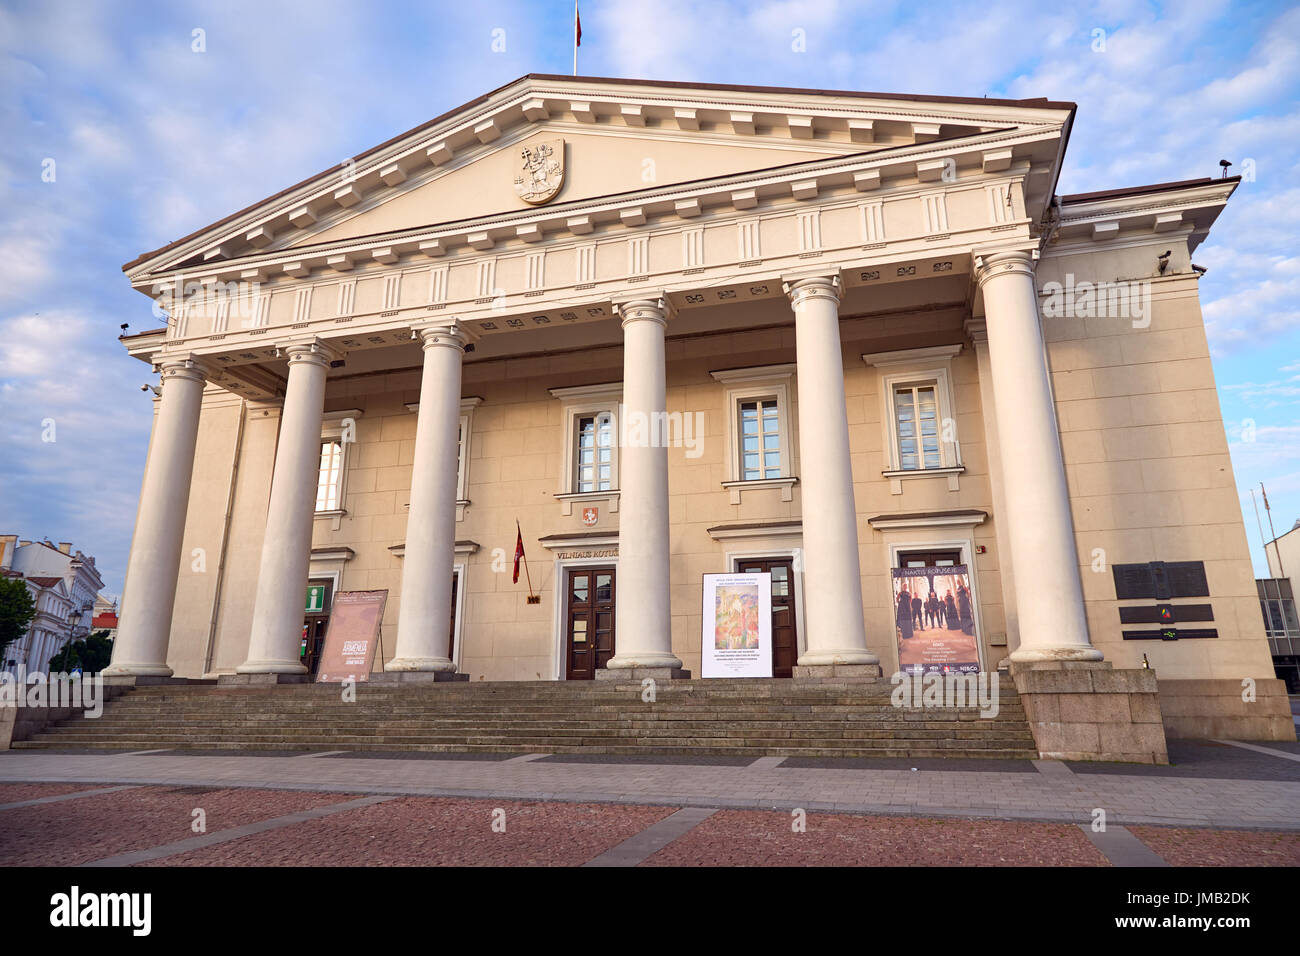 The building of the Town Hall in Vilnius at dawn without people Stock Photo